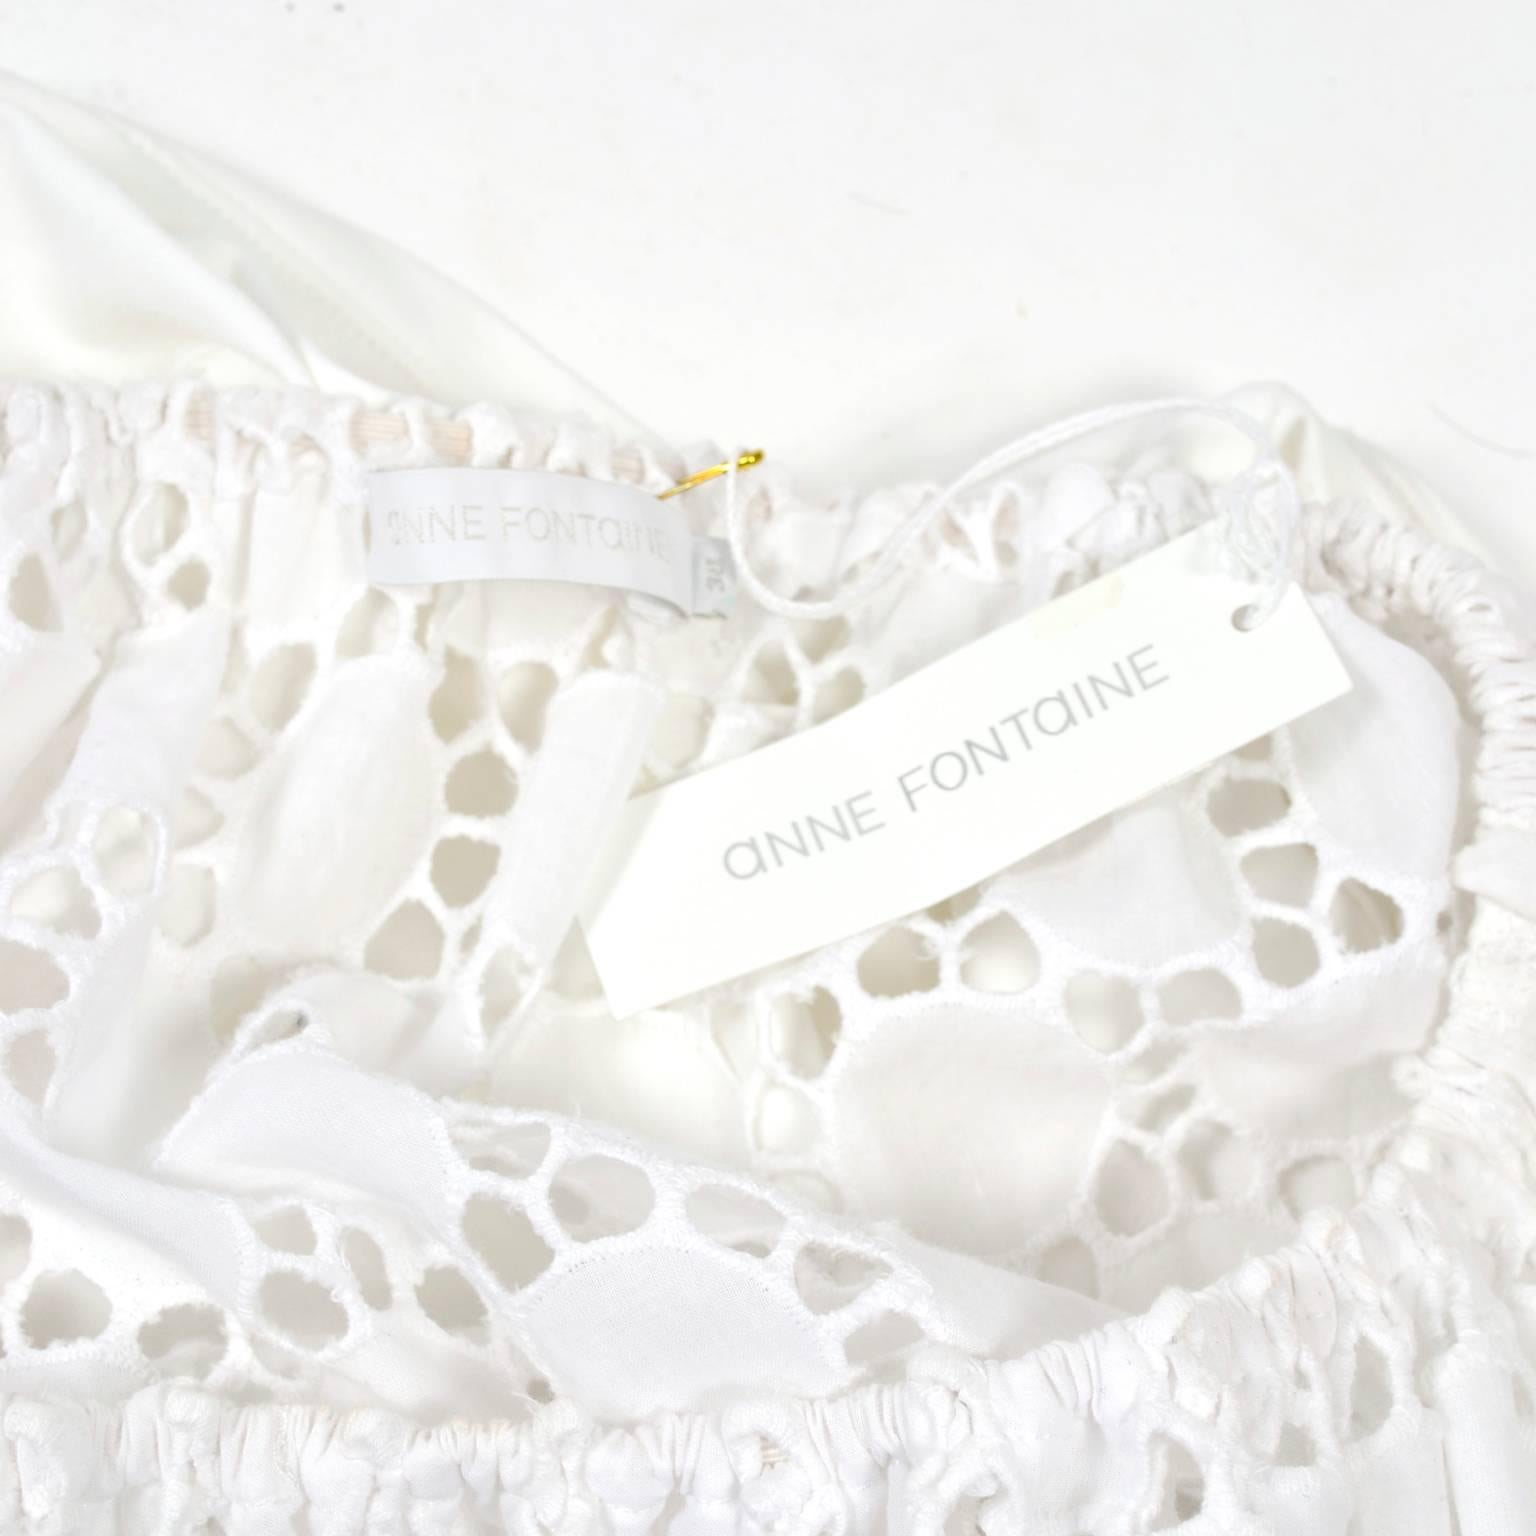 Off Shoulder Anne Fontaine White Eyelet Cotton Blouse Top New With Tags 2